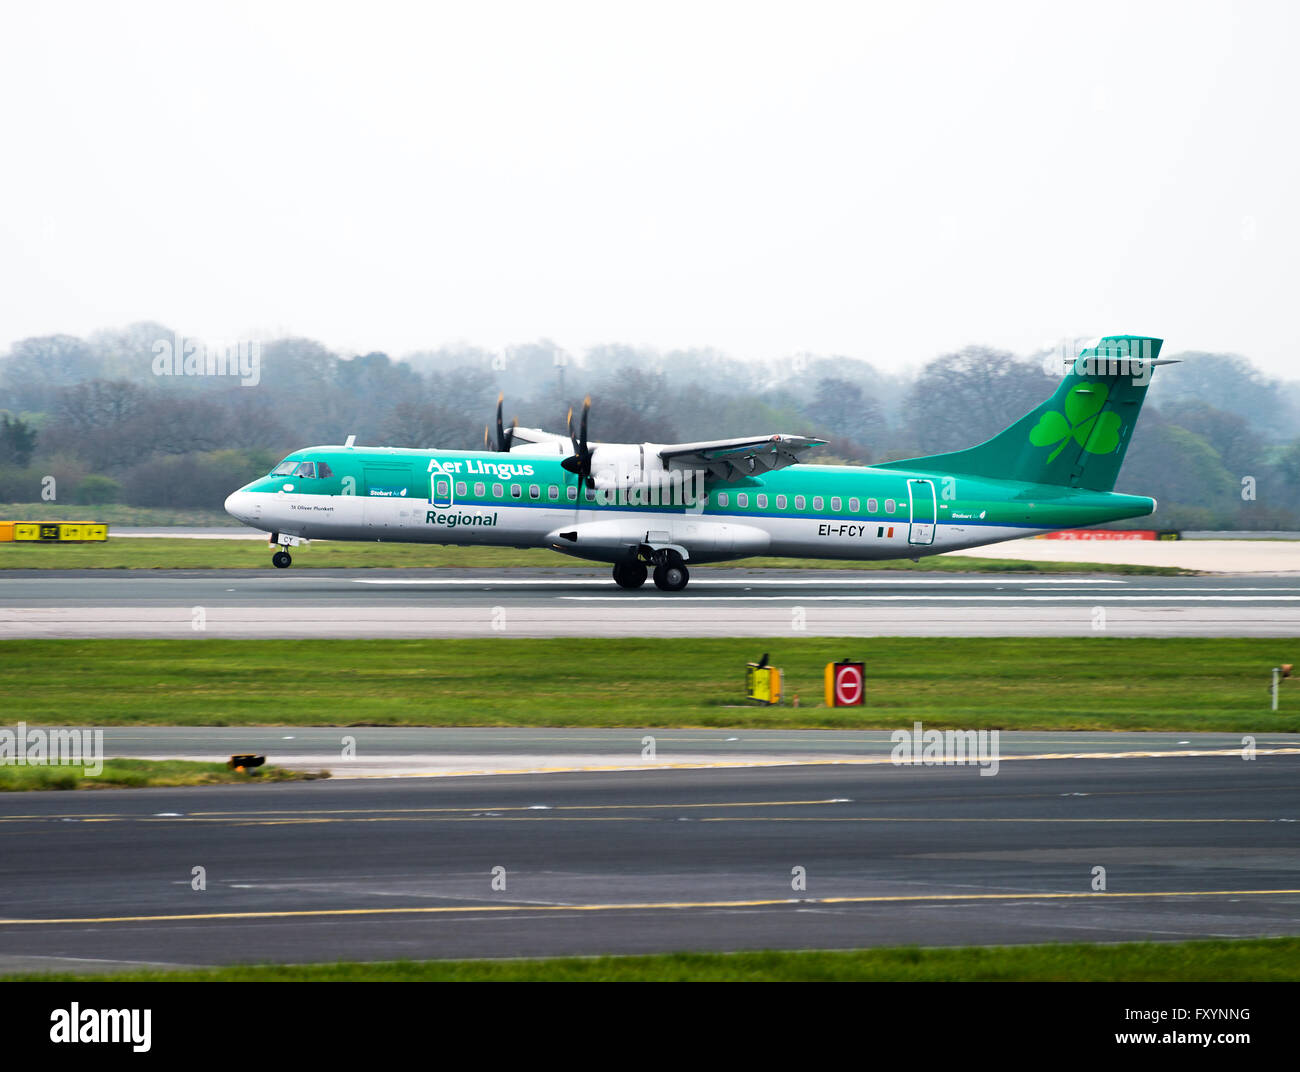 Aer Lingus Regional Airline ATR72-600 Airliner EI-FCY Taking Off at Manchester International Airport England United Kingdom UK Stock Photo